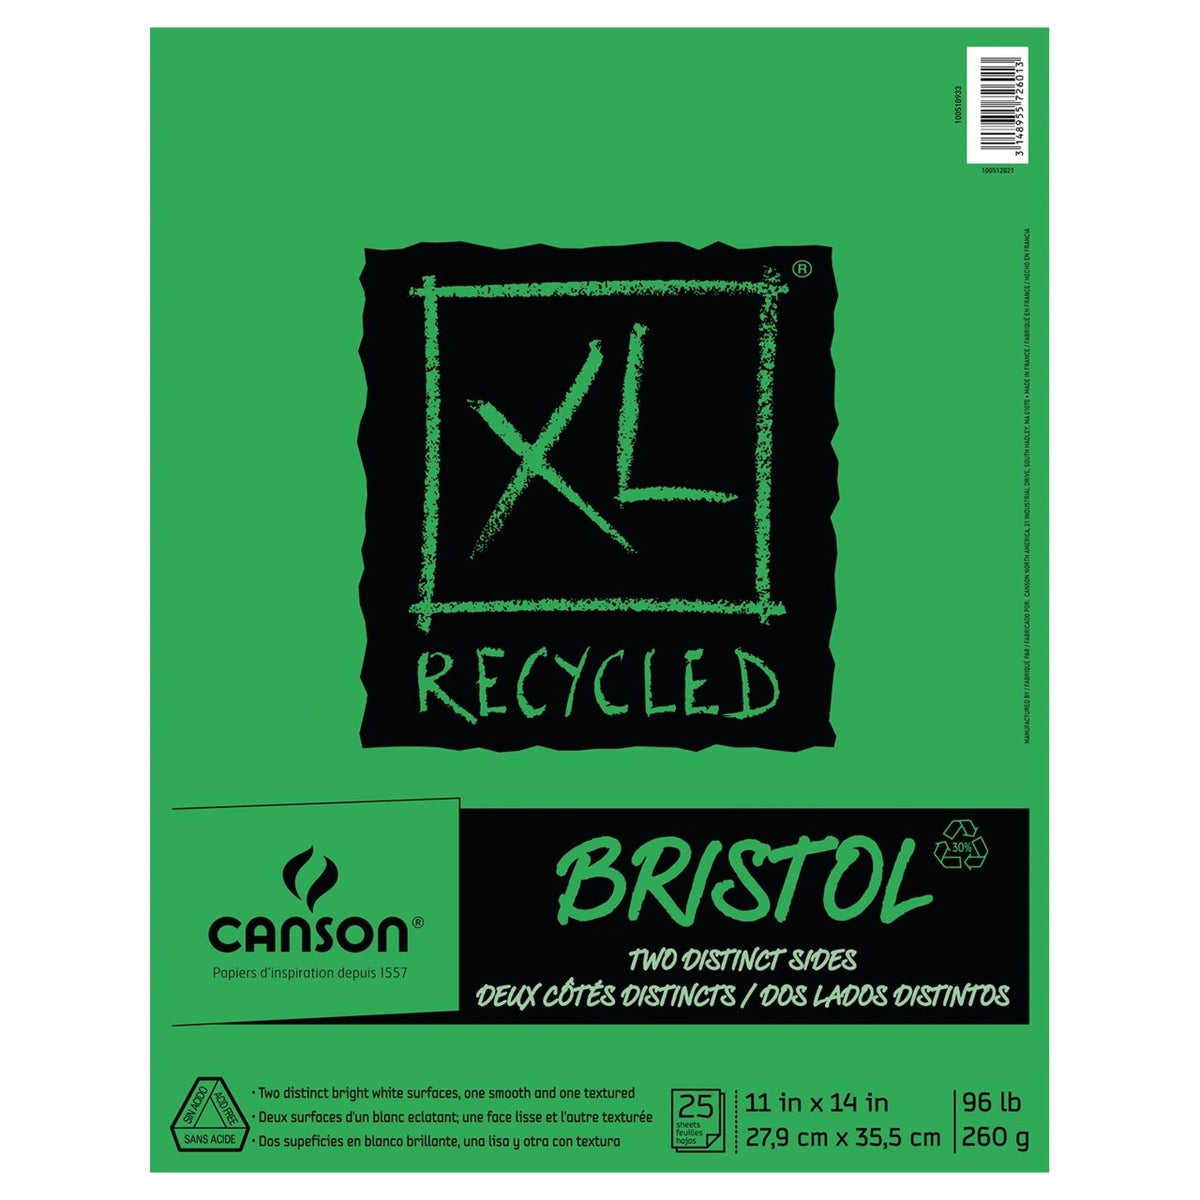 Canson XL Recycled Bristol - 25 Sheet Pad - 11x14 inch - merriartist.com